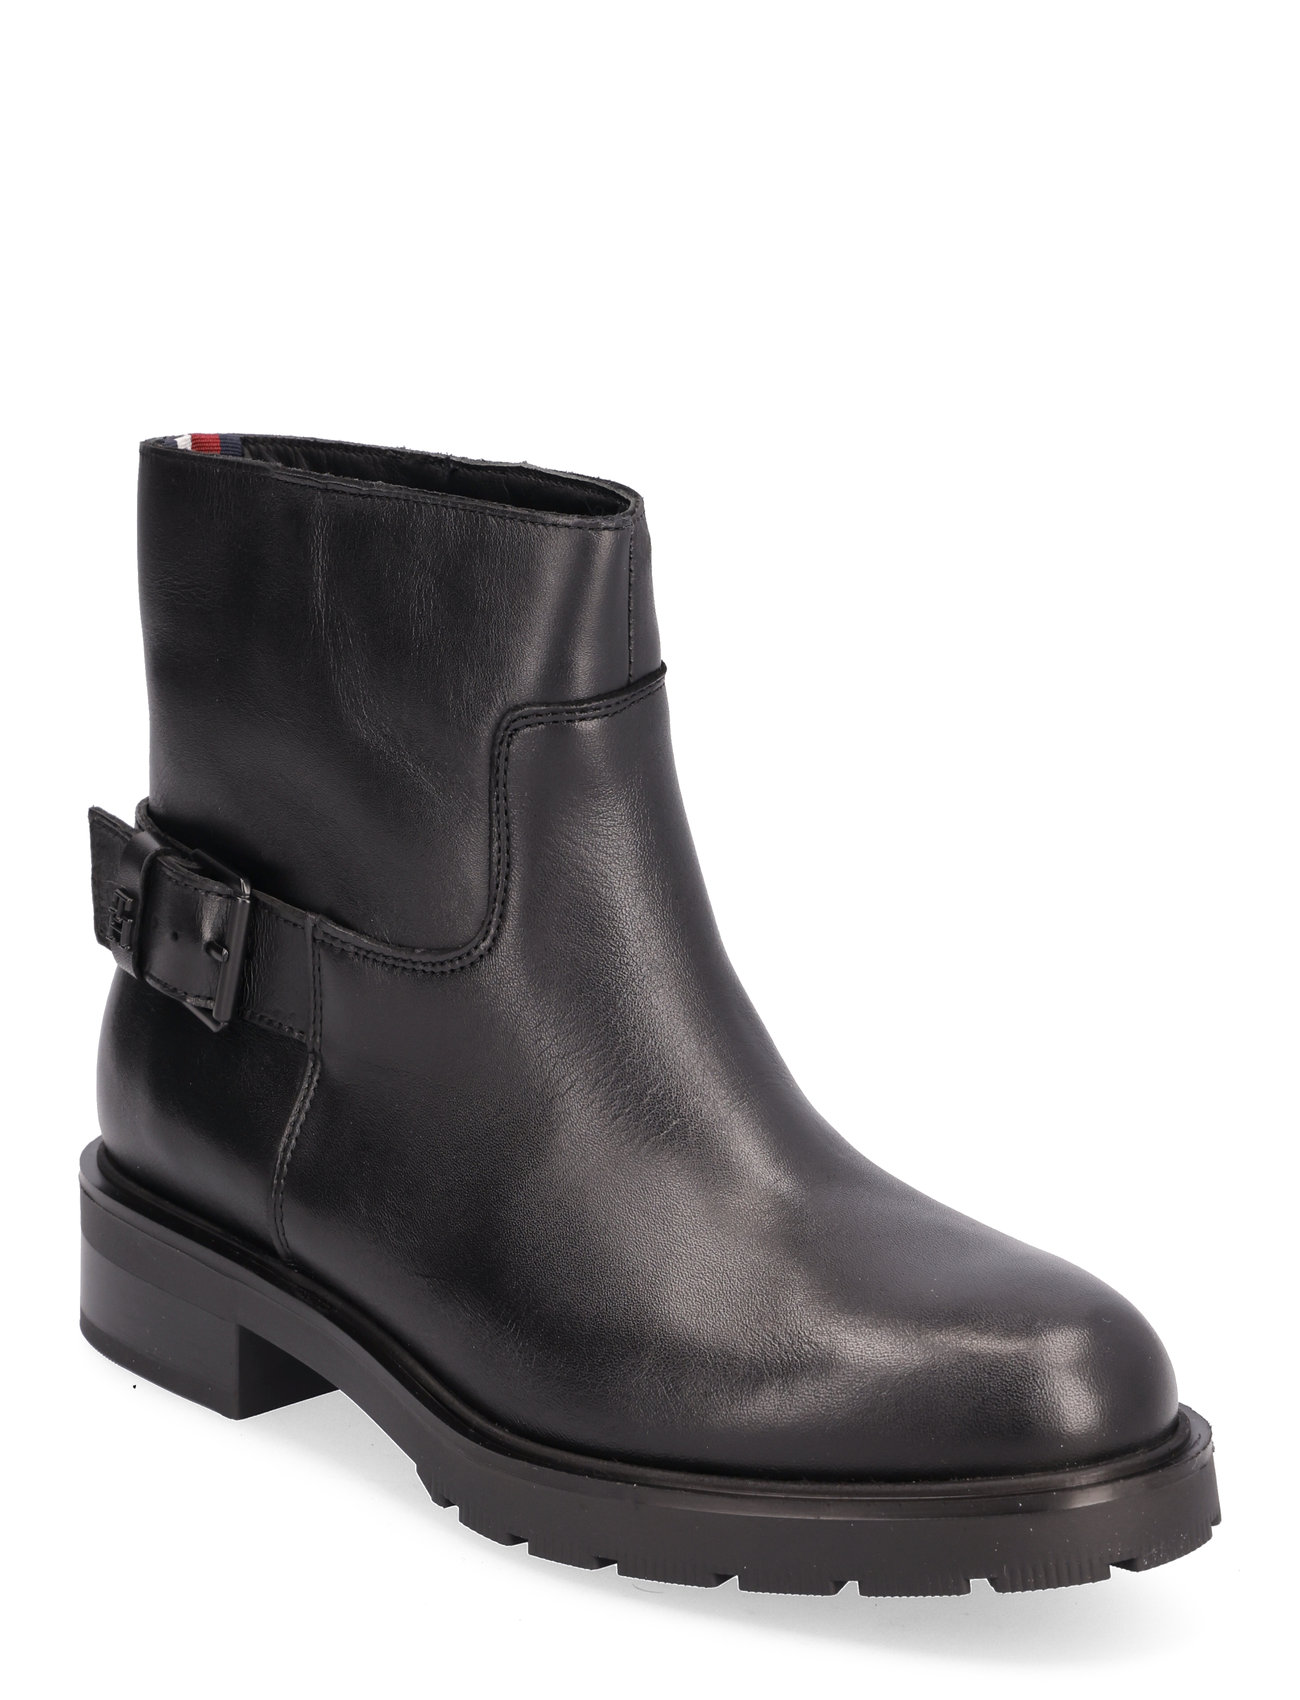 Th Monochromatic Bikerboot Shoes Boots Ankle Boots Ankle Boots Flat Heel Black Tommy Hilfiger